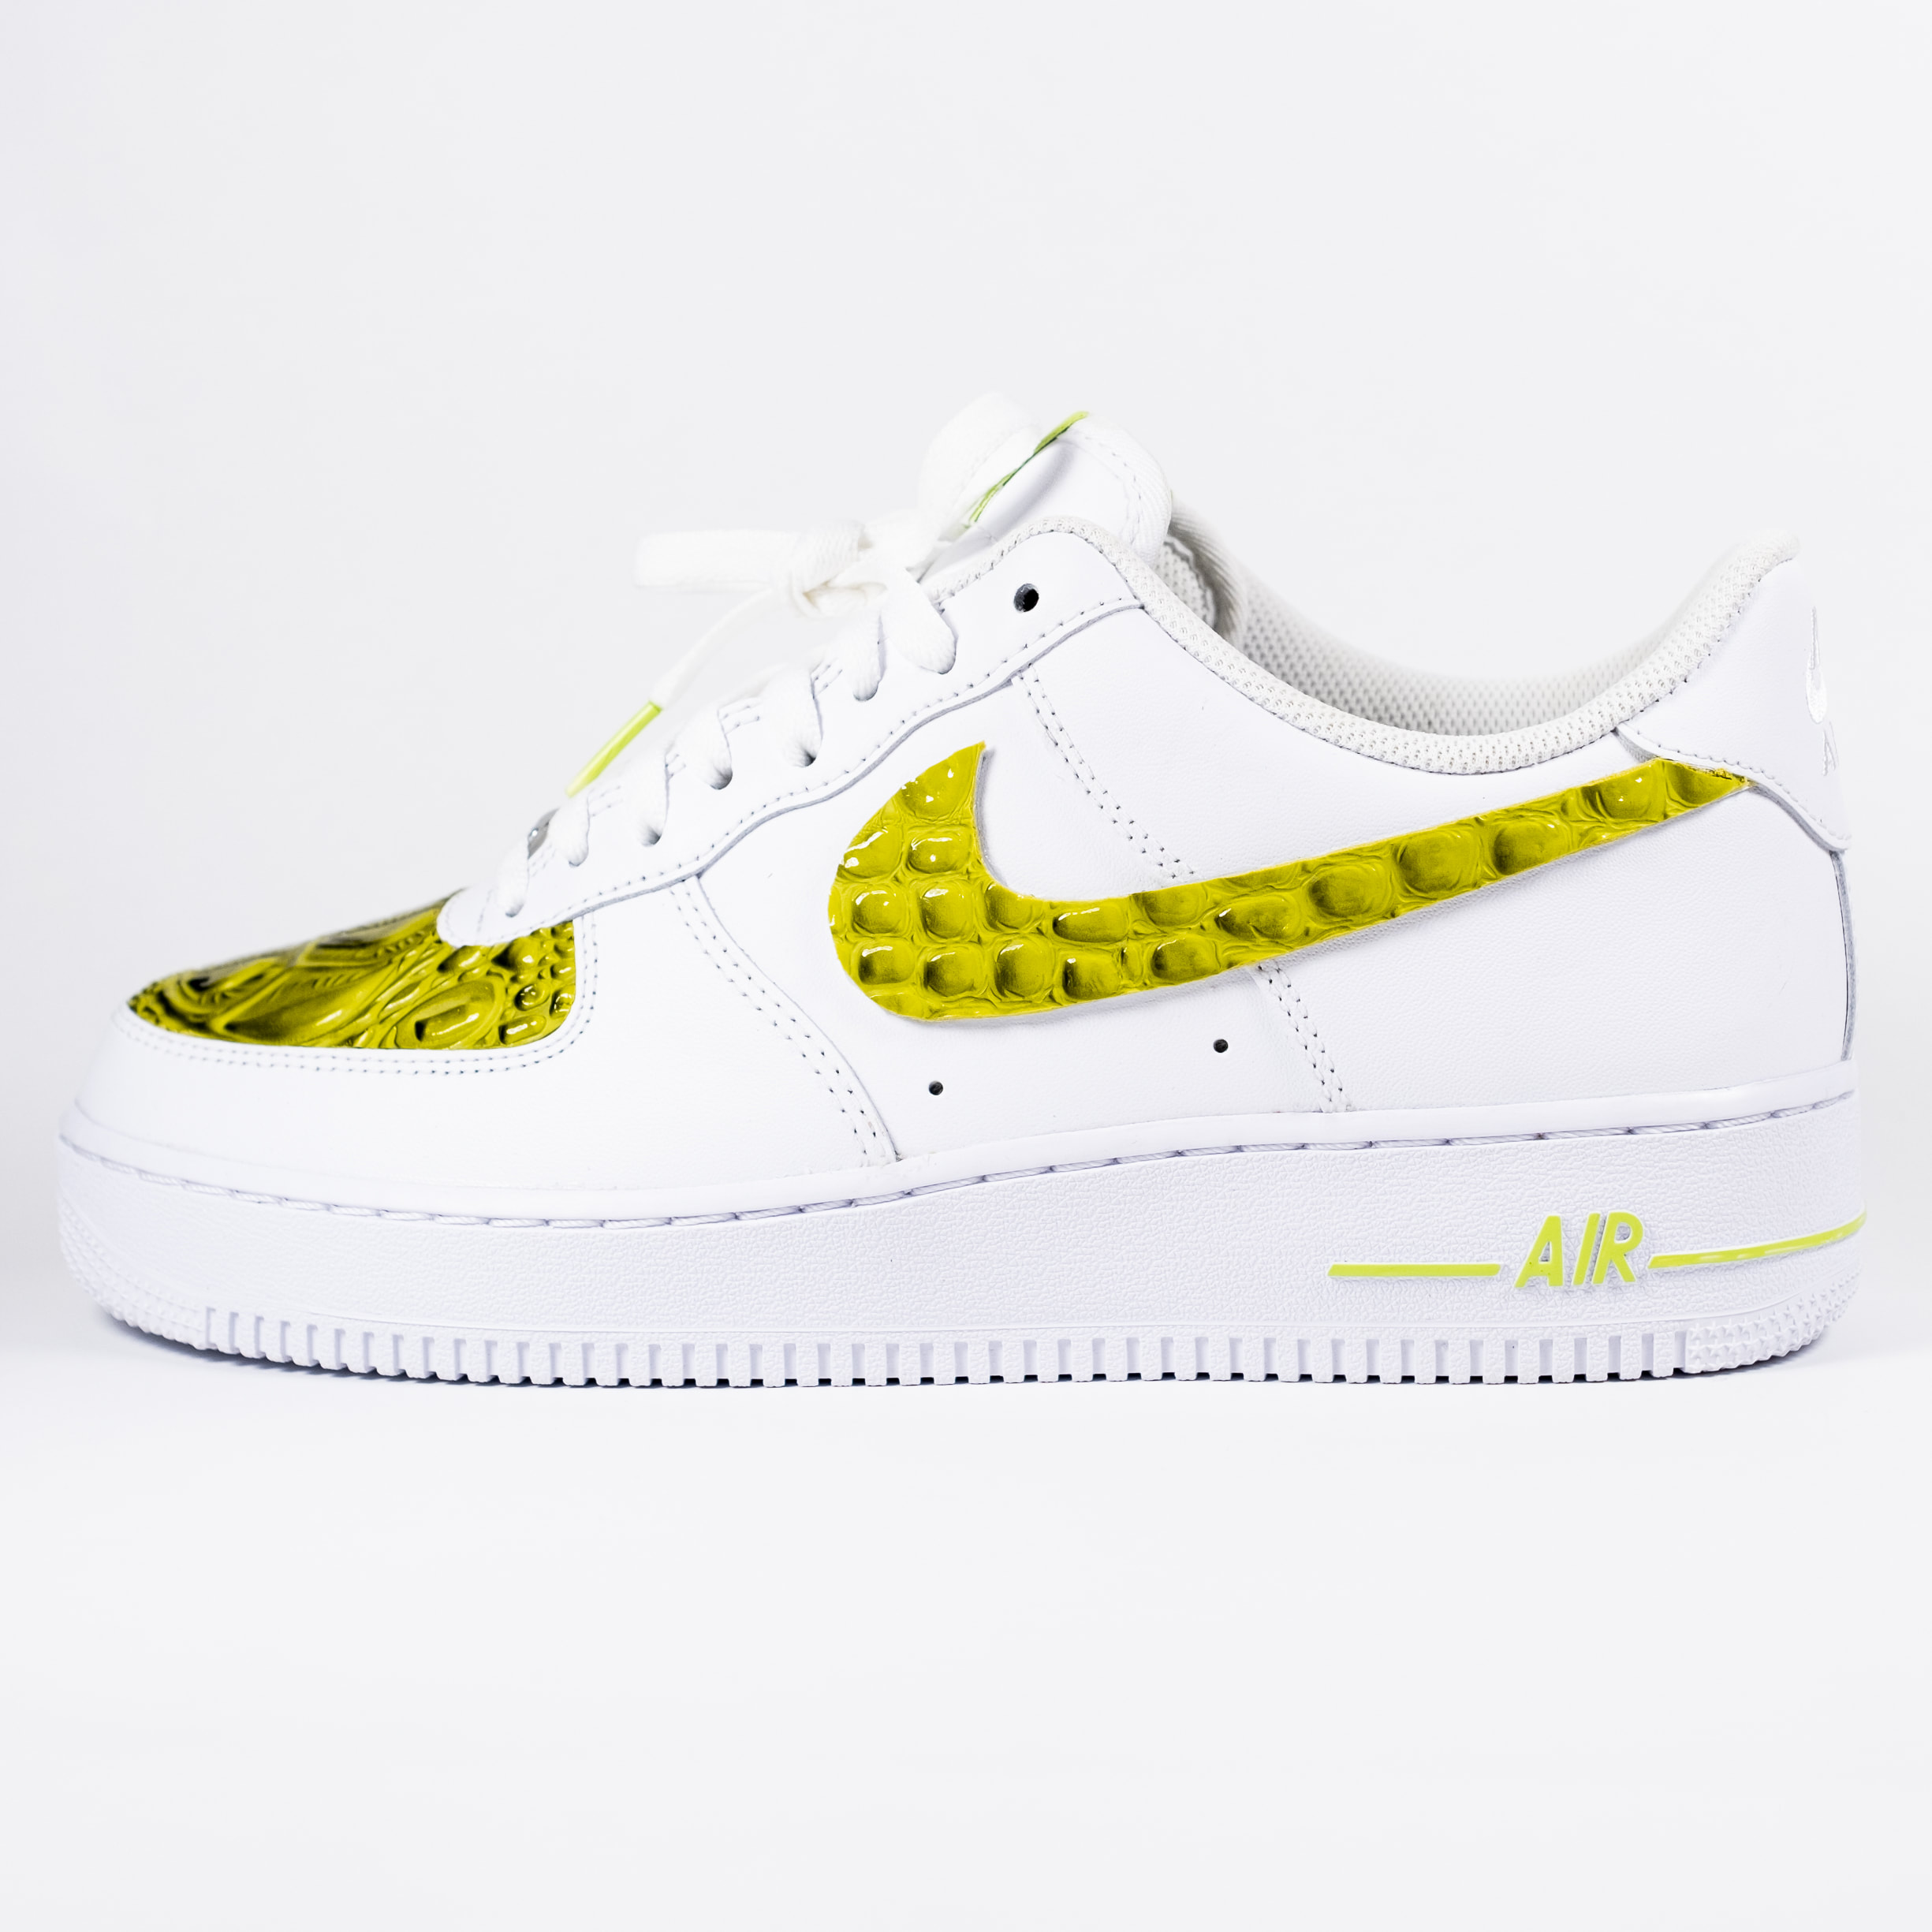 white air forces with lime green